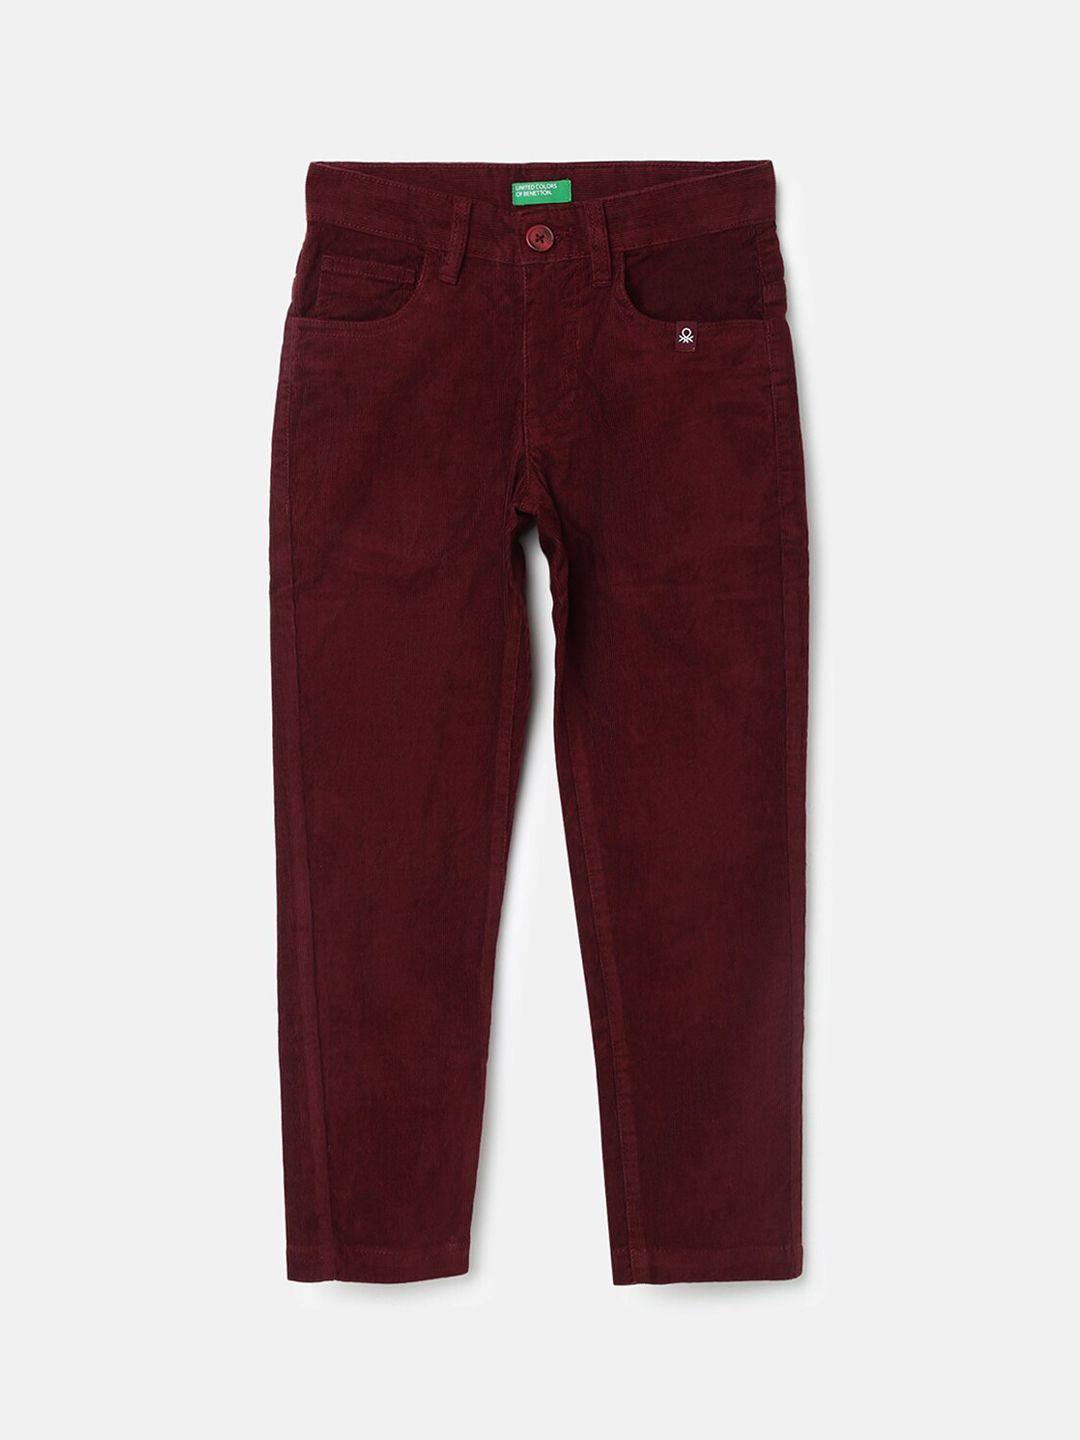 united colors of benetton boys maroon slim fit cotton trouser